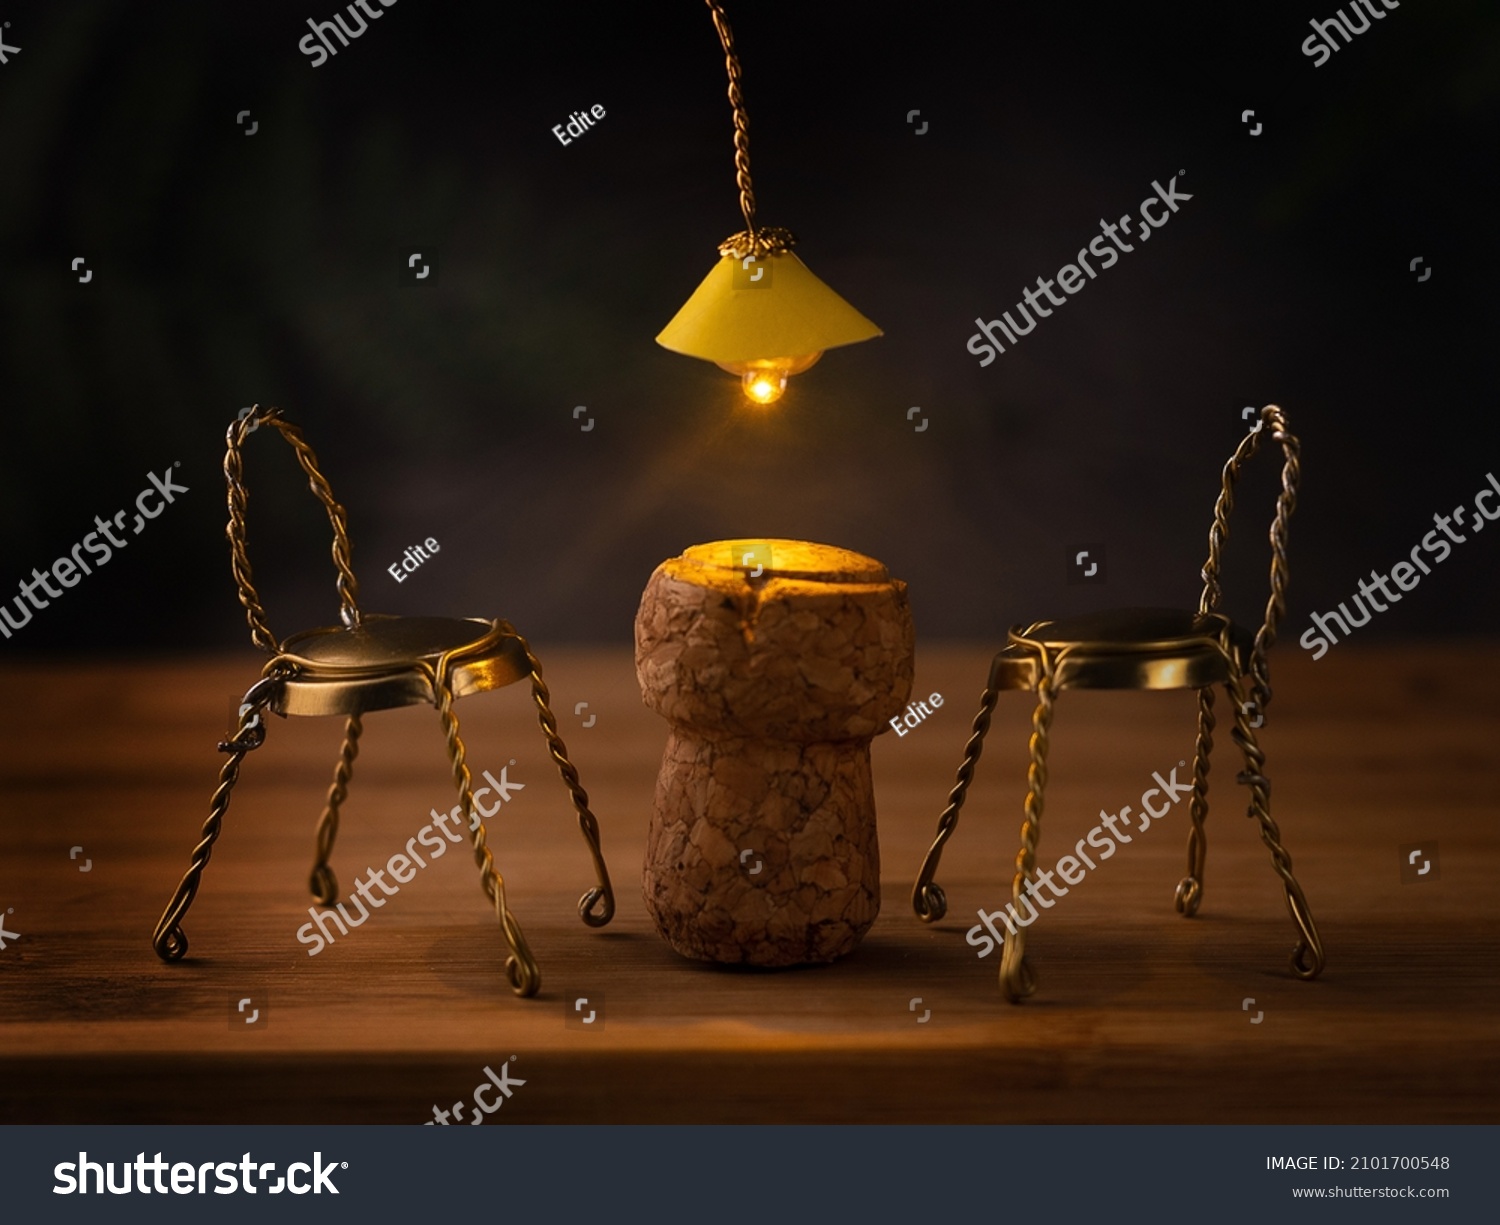 Bar mood, smoky, dark background, plank floor. The table is made of champagne cork, but the chairs are made of metal parts of cork. A yellow chandelier shines above the table. Sense photo. Mood. #2101700548